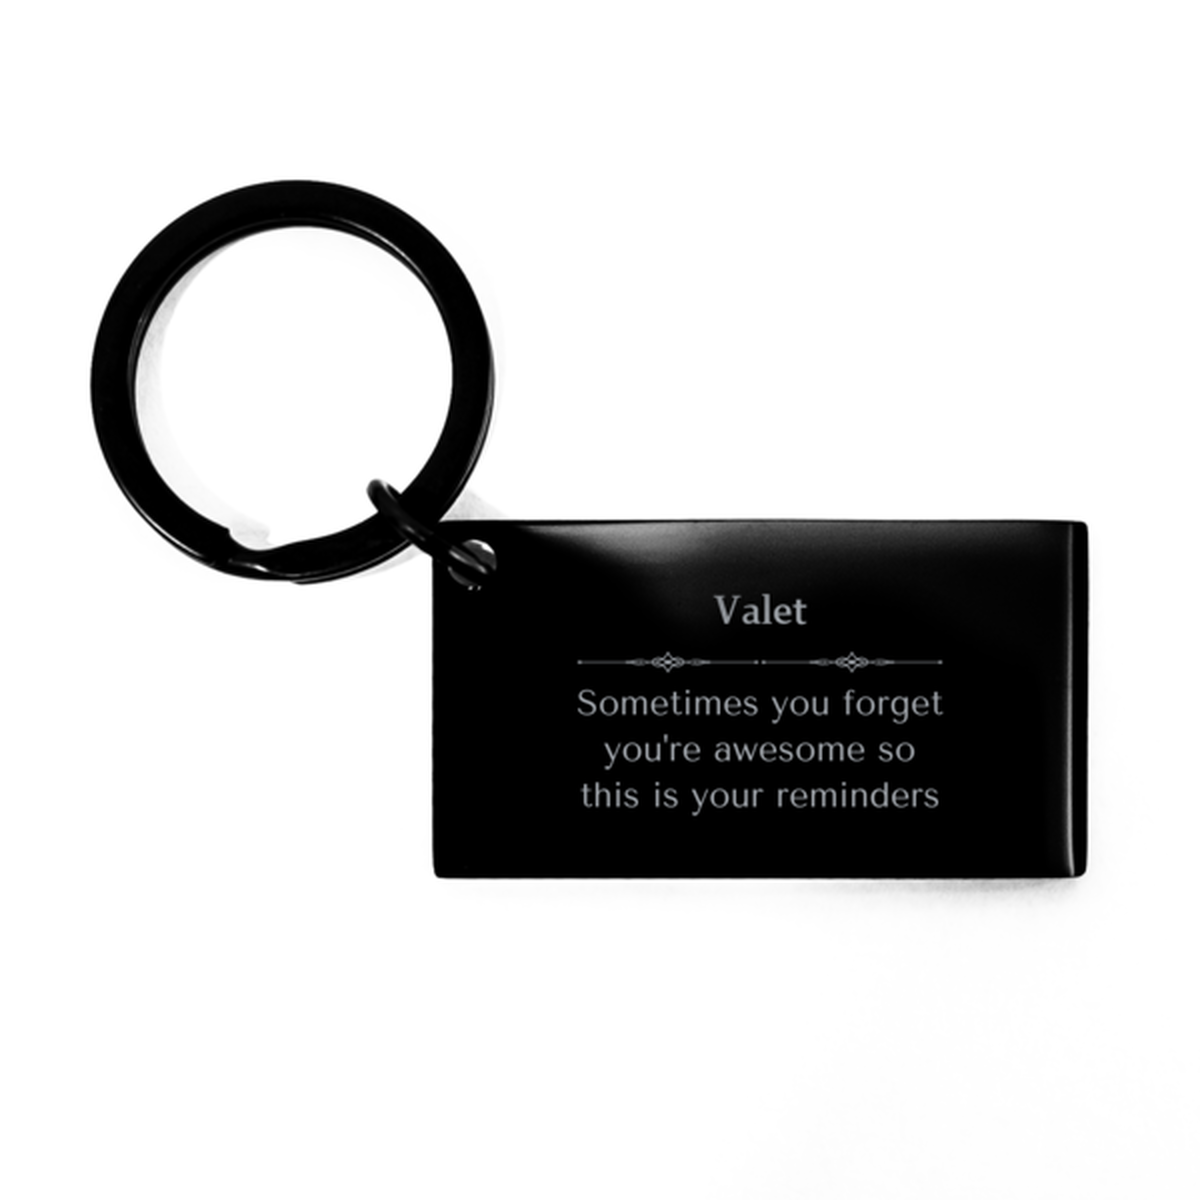 Sentimental Valet Keychain, Agent Sometimes you forget you're awesome so this is your reminders, Graduation Christmas Birthday Gifts for Valet, Men, Women, Coworkers